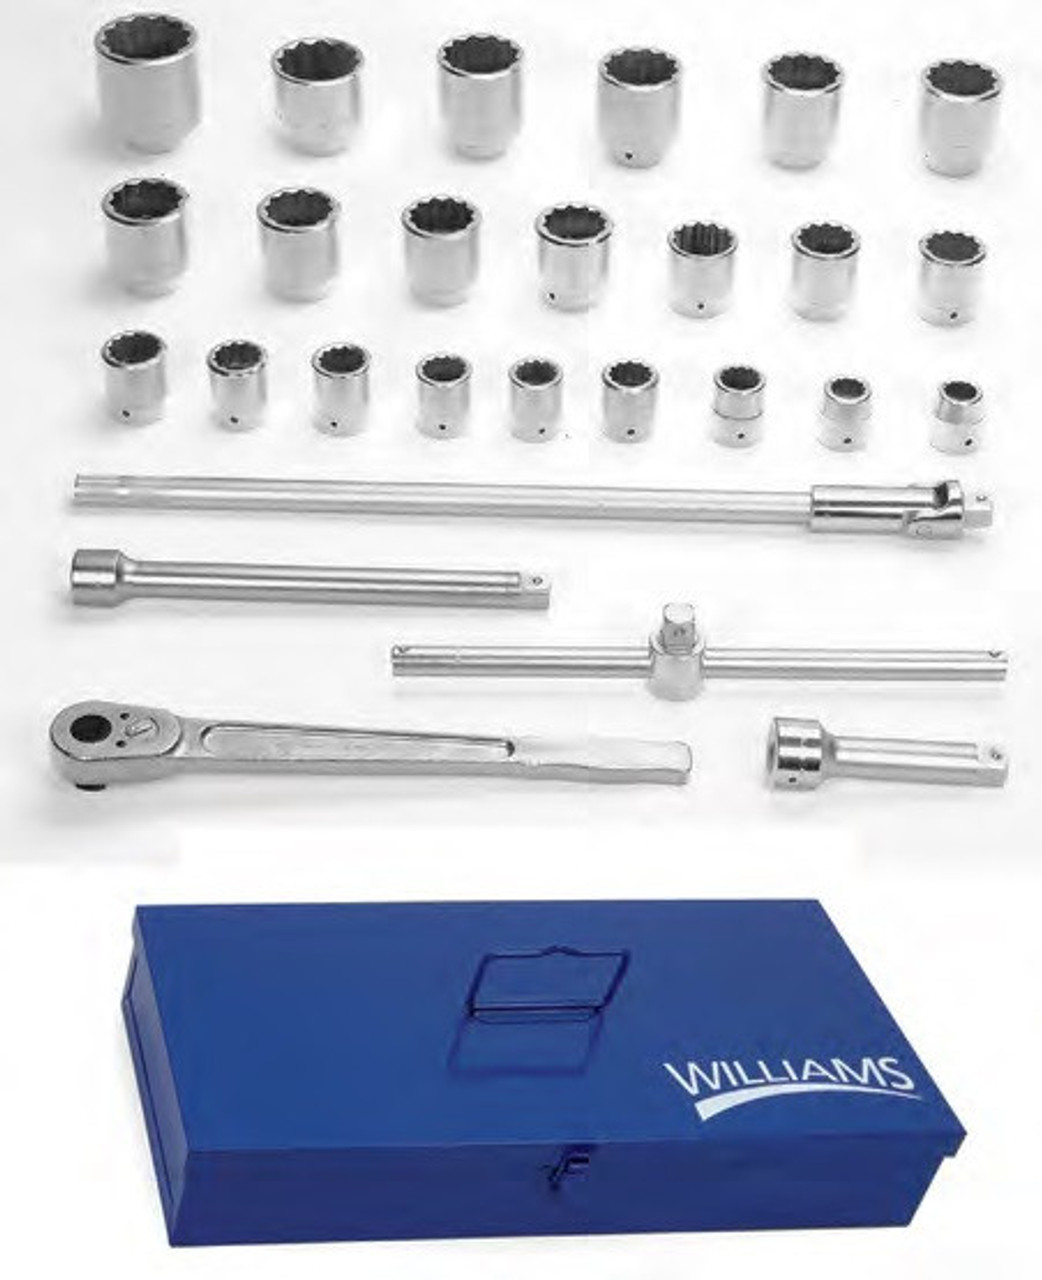 Williams 1 1/16 - 3 1/8 Williams SAE 1 Dr Socket and Drive Tool Set 12 Pt 27 Pcs with Tool Box - JHWWSX-28TB